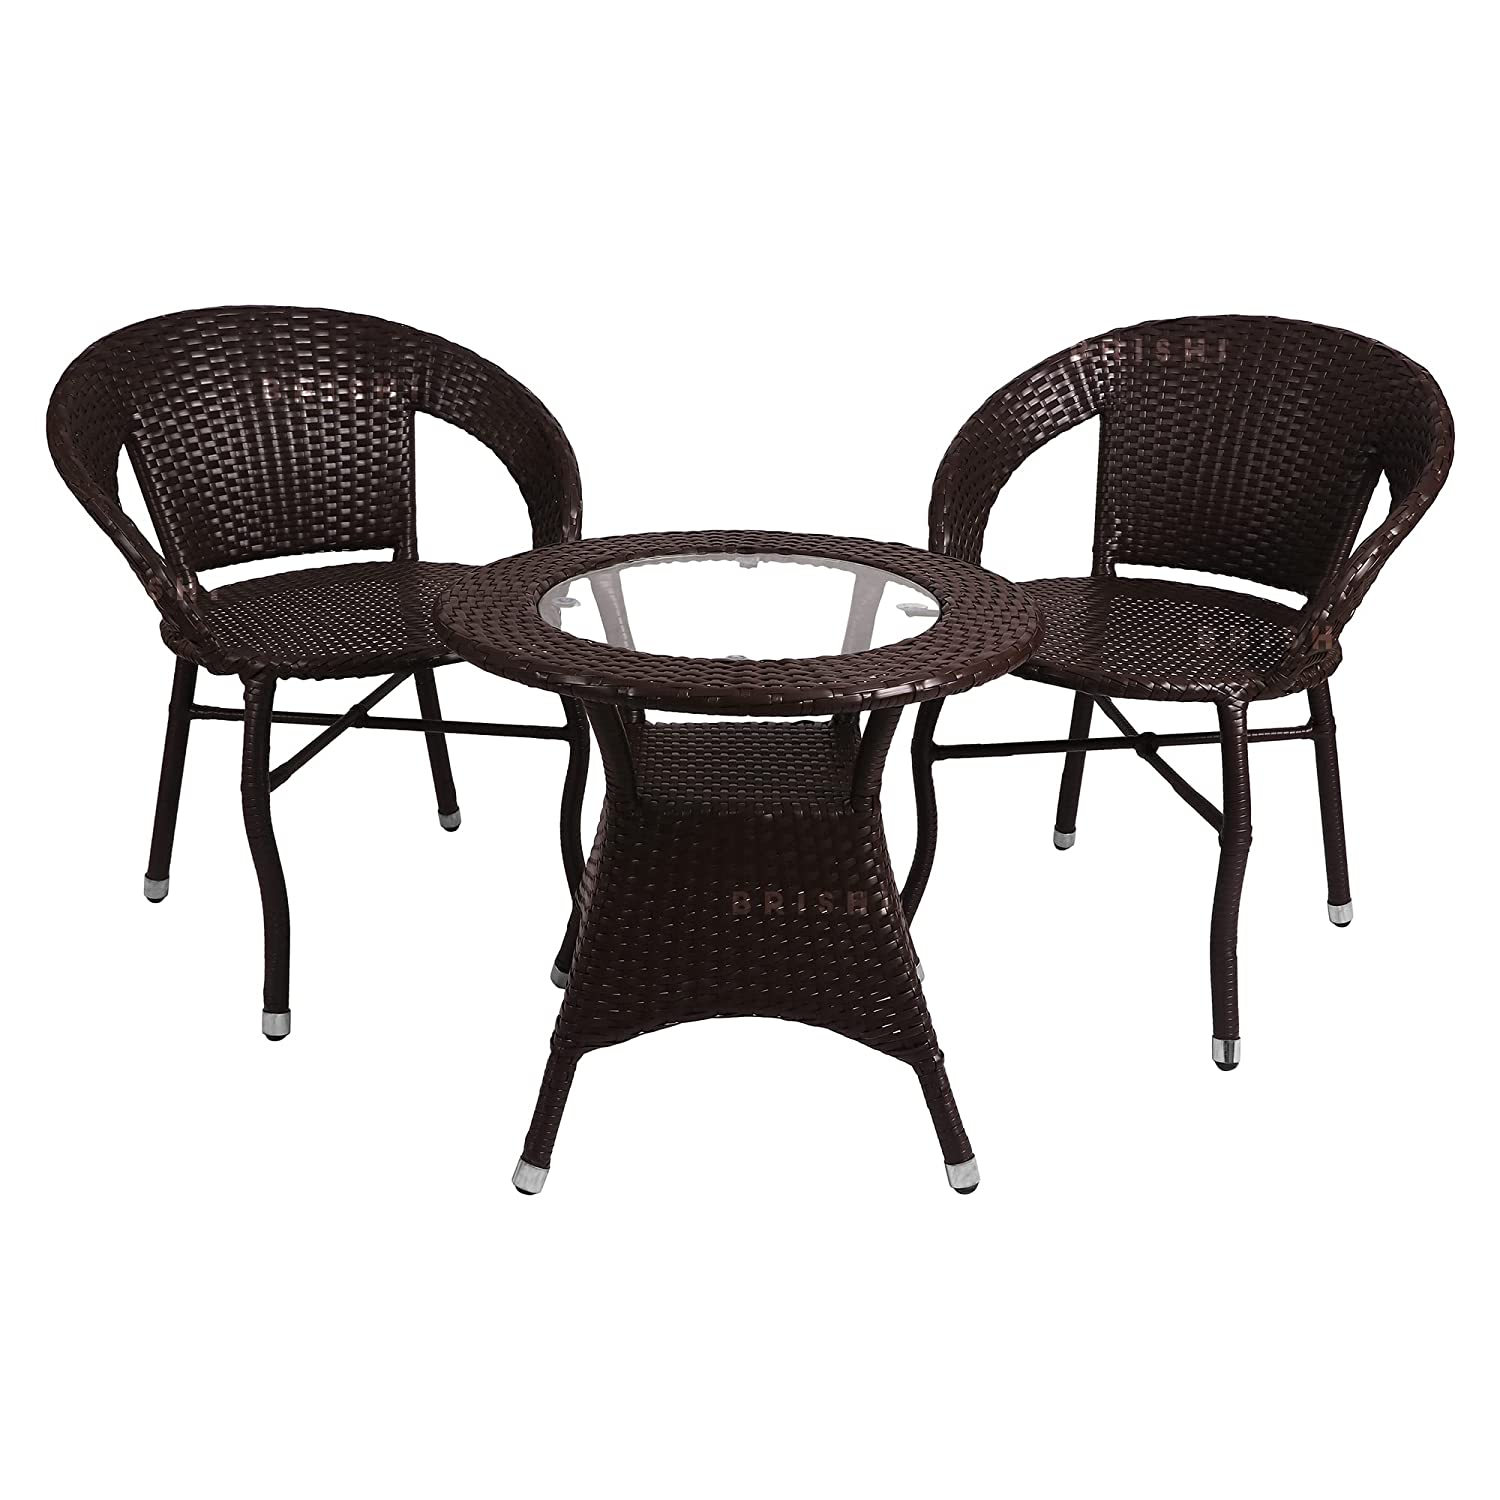 BRISHI Garden Patio Seating Chair and Table Set